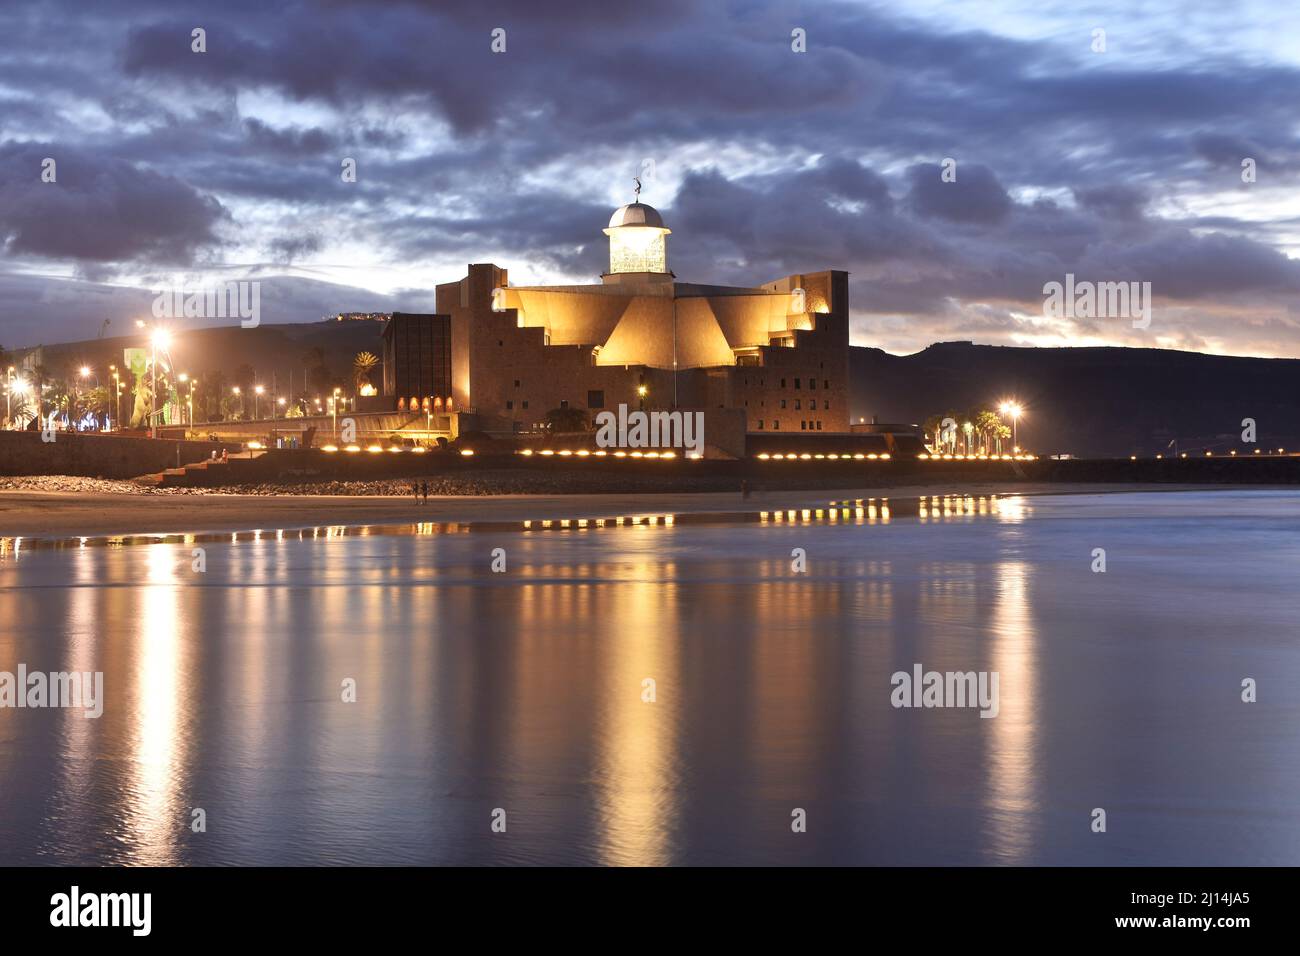 Auditorio Alfredo Kraus, modern architecture illuminated at dusk, located at the end of Las Canteras beach in Las Palmas of Gran Canaria Spain. Stock Photo